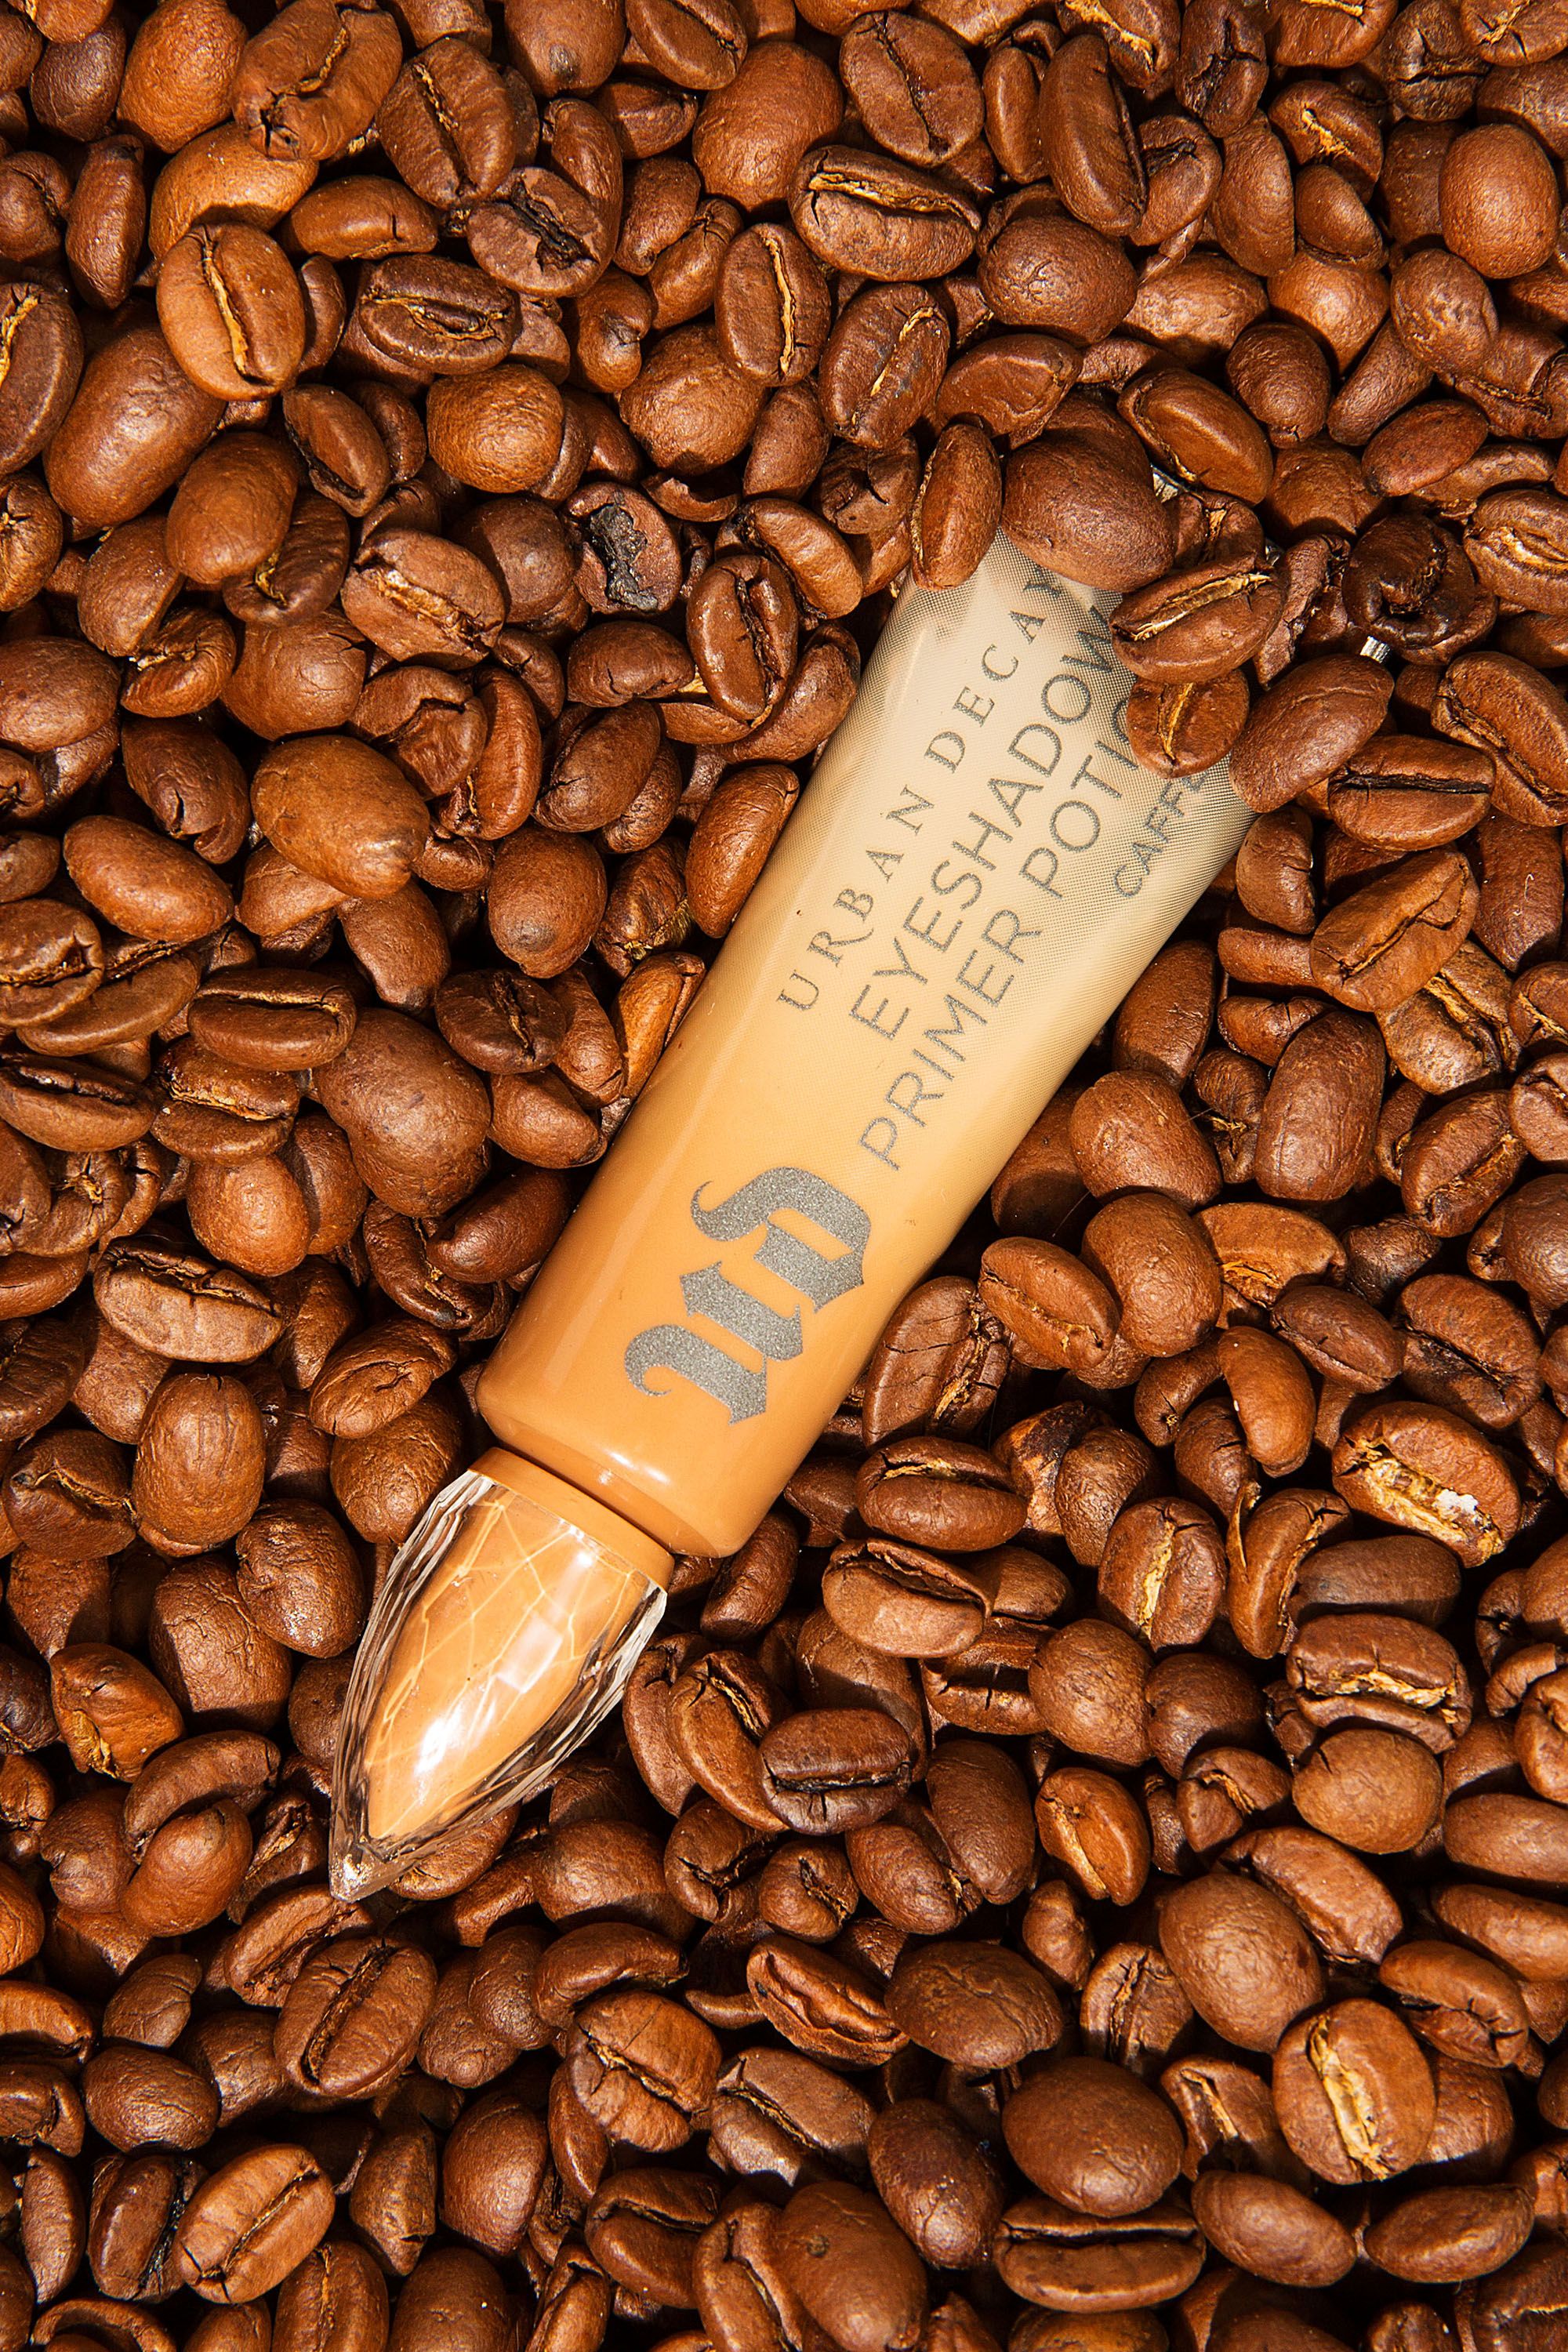 13 Beauty Products Inspired By Coffee - Coffee Beauty Products